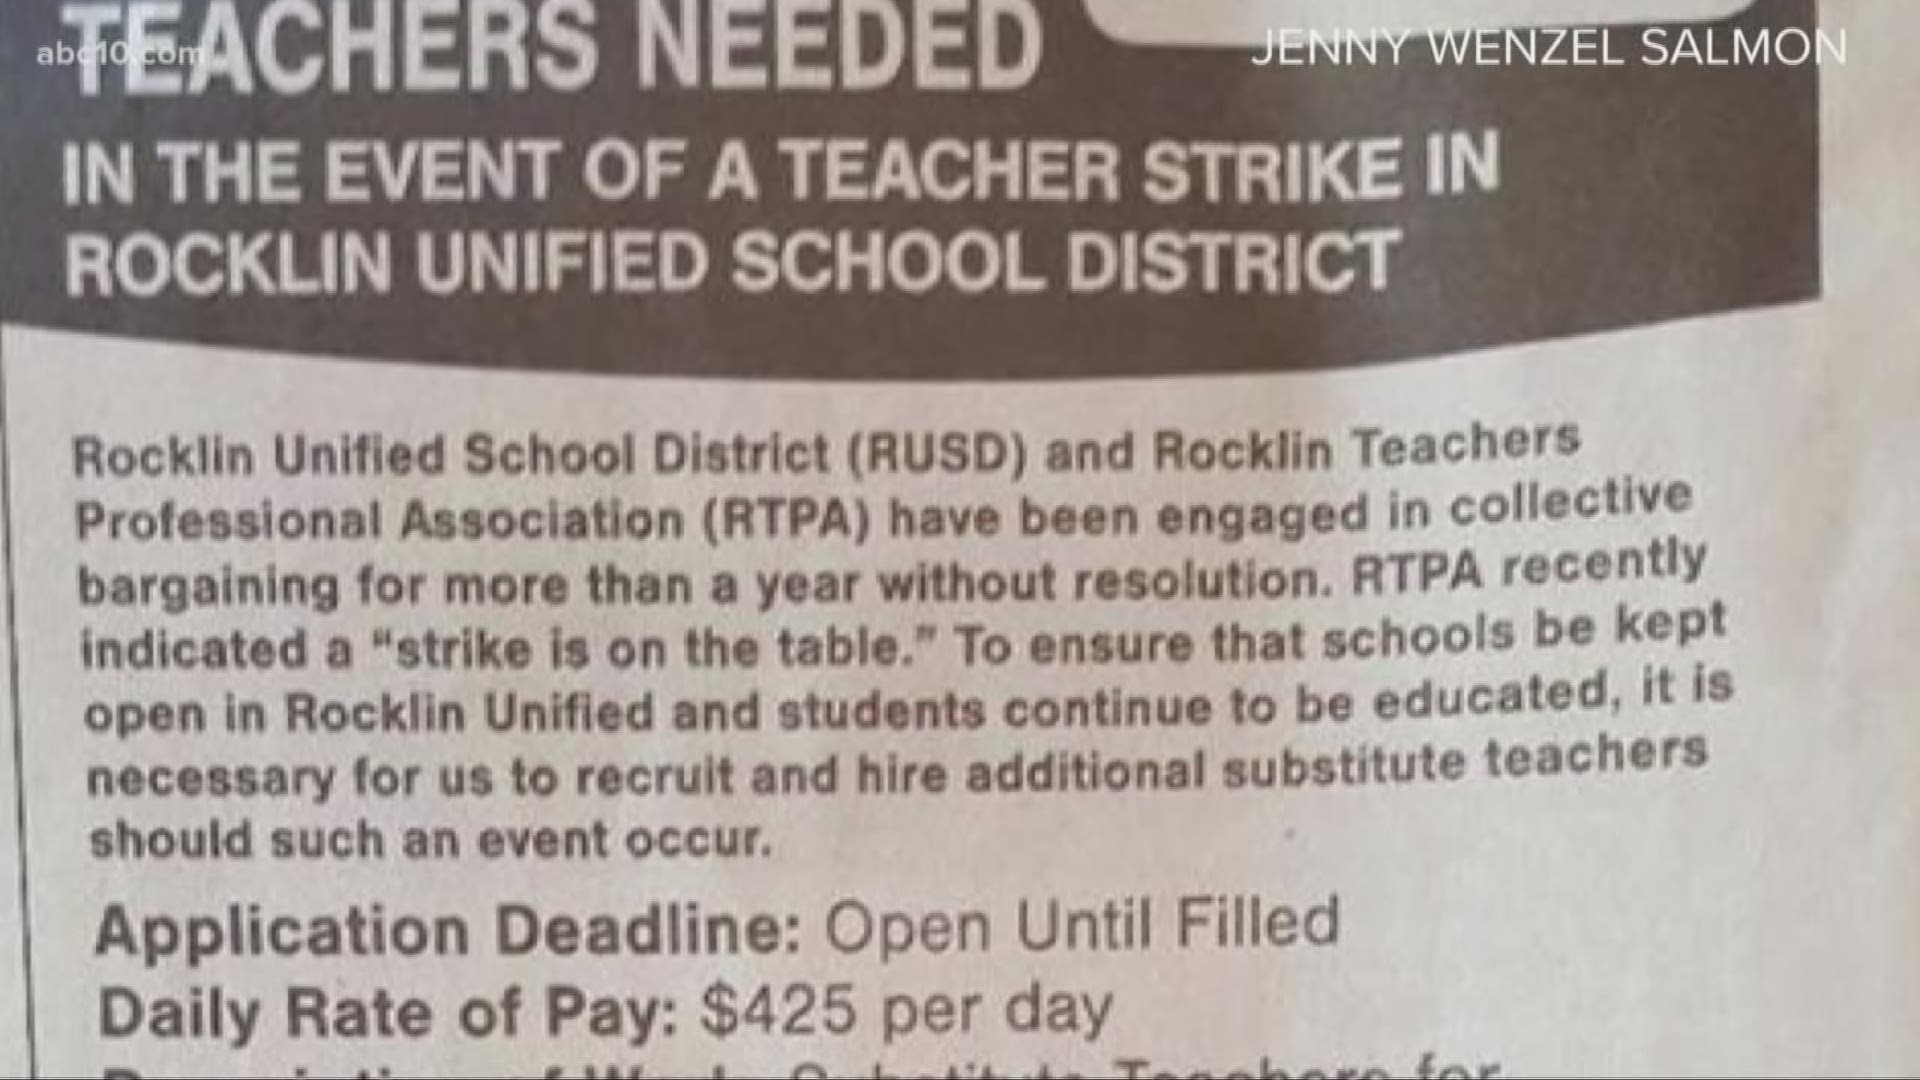 The Rocklin Unified School District looking for substitute teachers for $425 a day in case of a teacher strike.